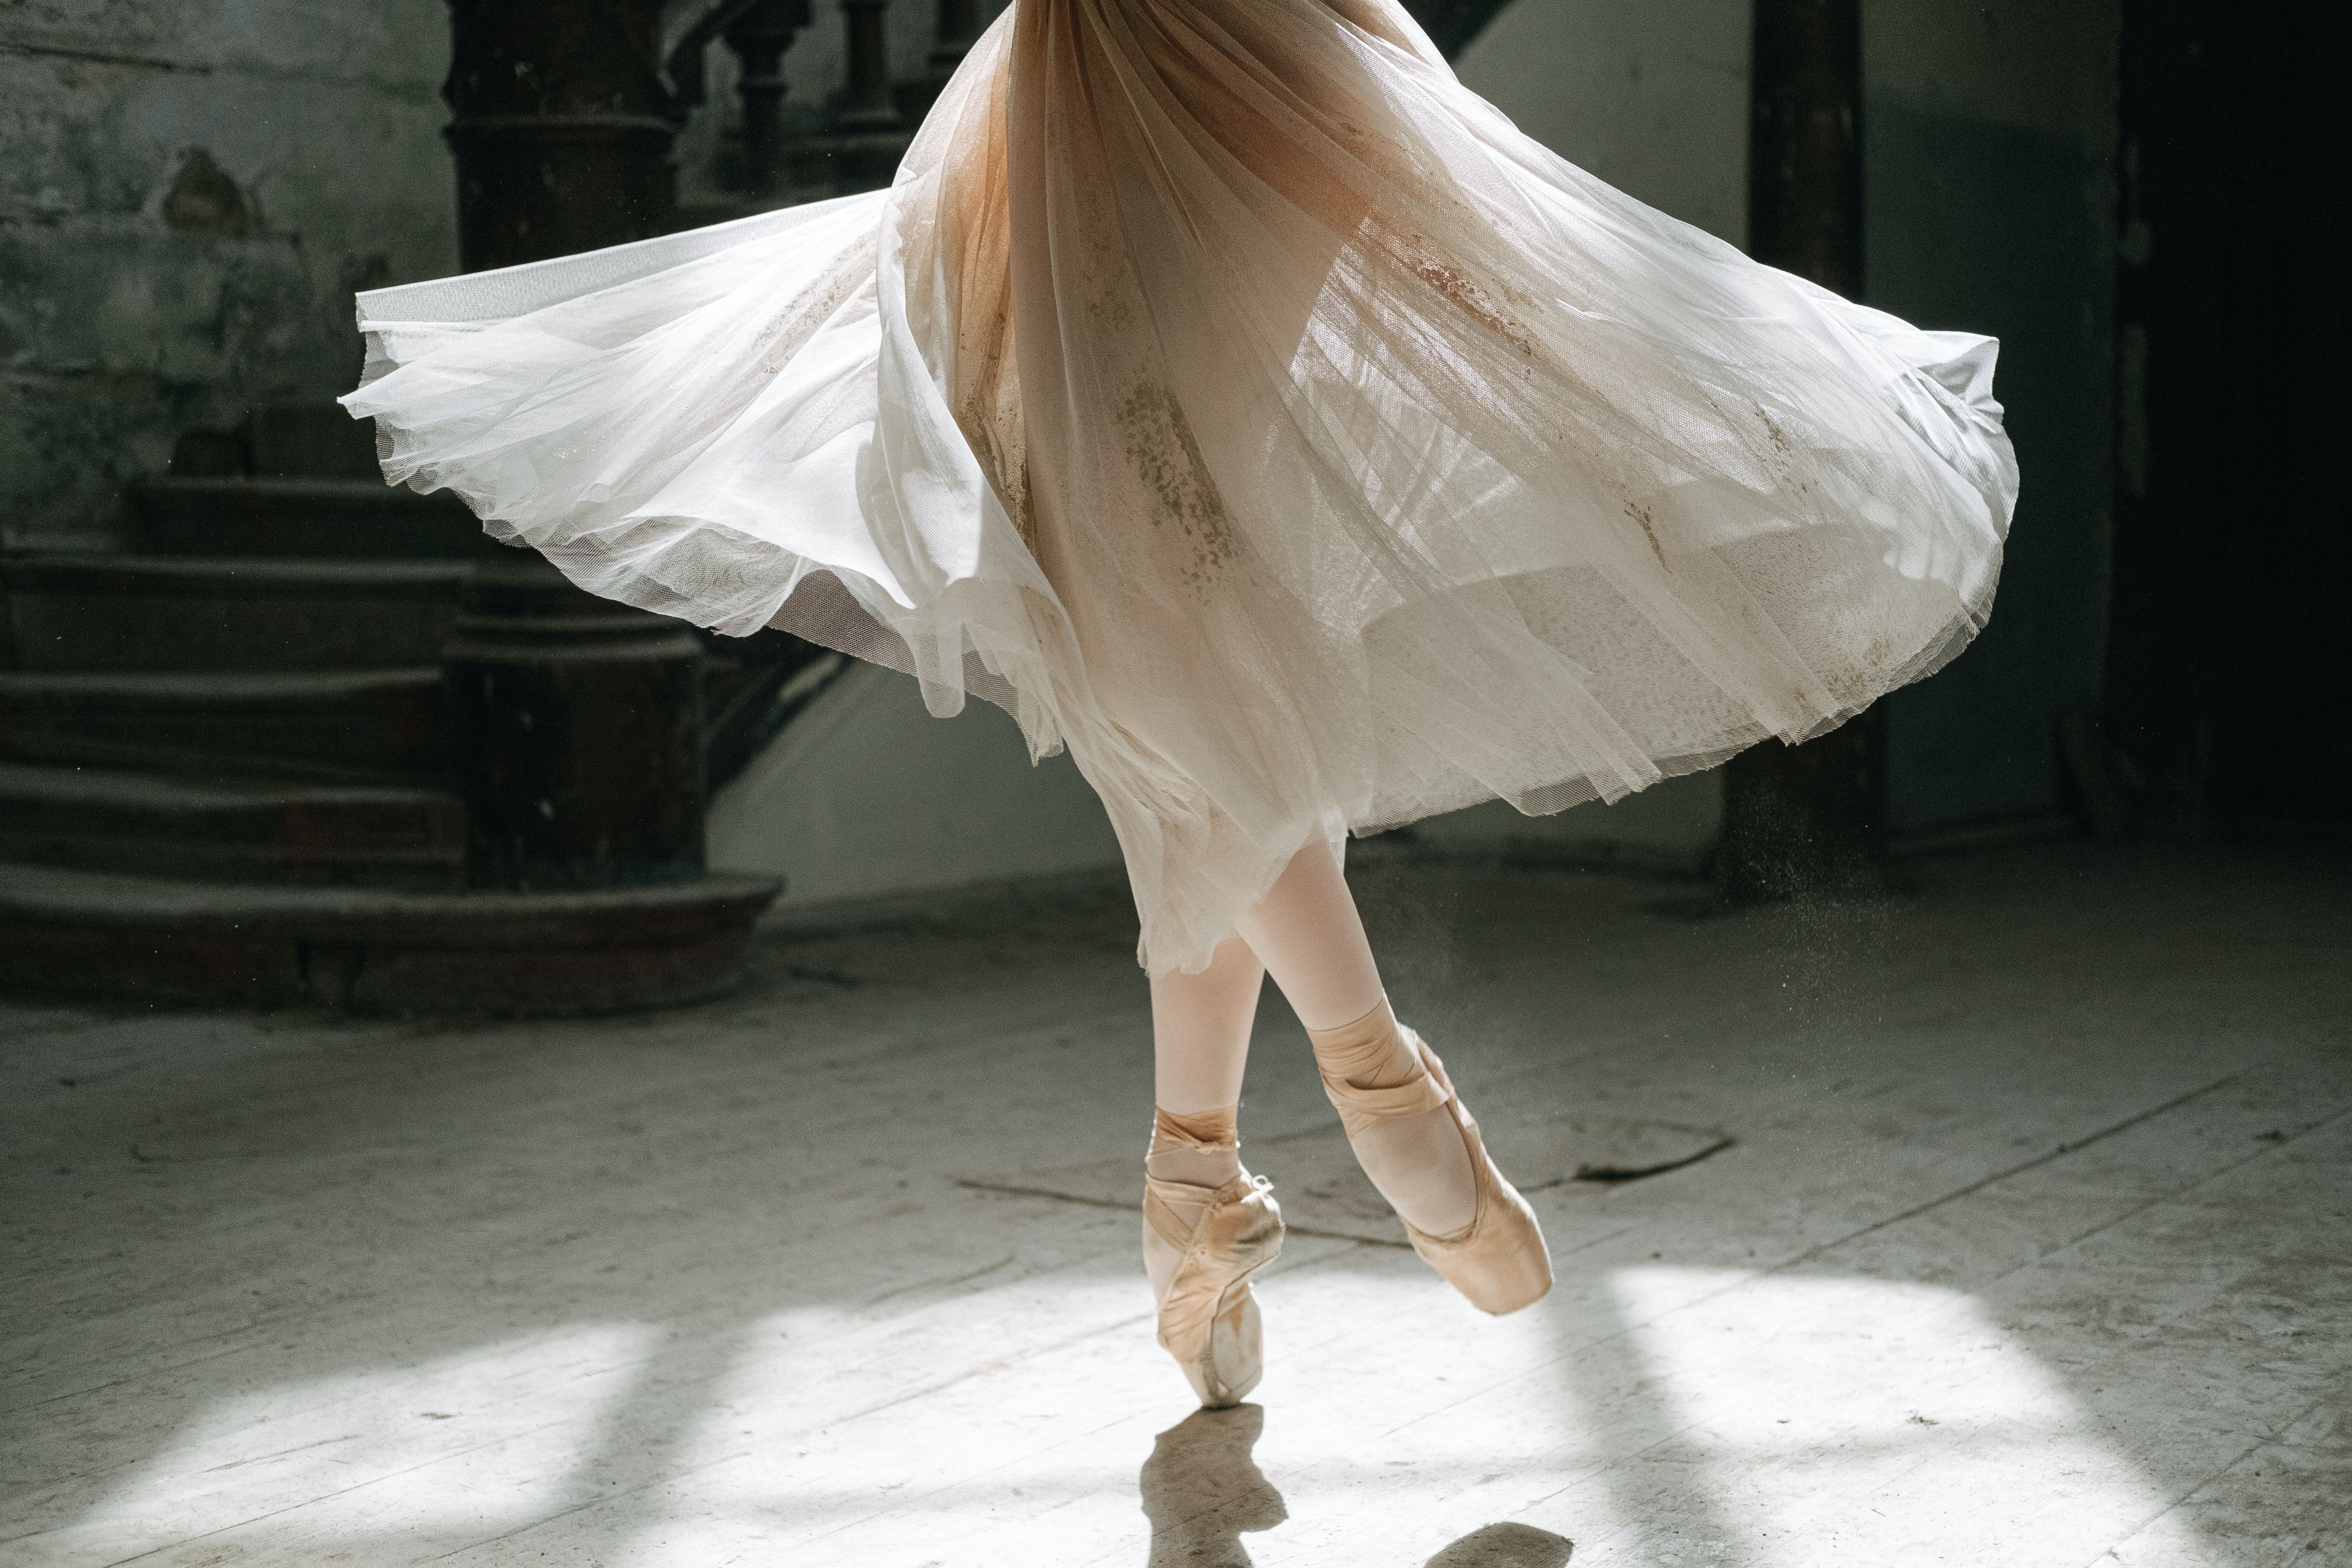 A ballerina in a white dress and pointe shoes dances in a sunlit room. - Ballet